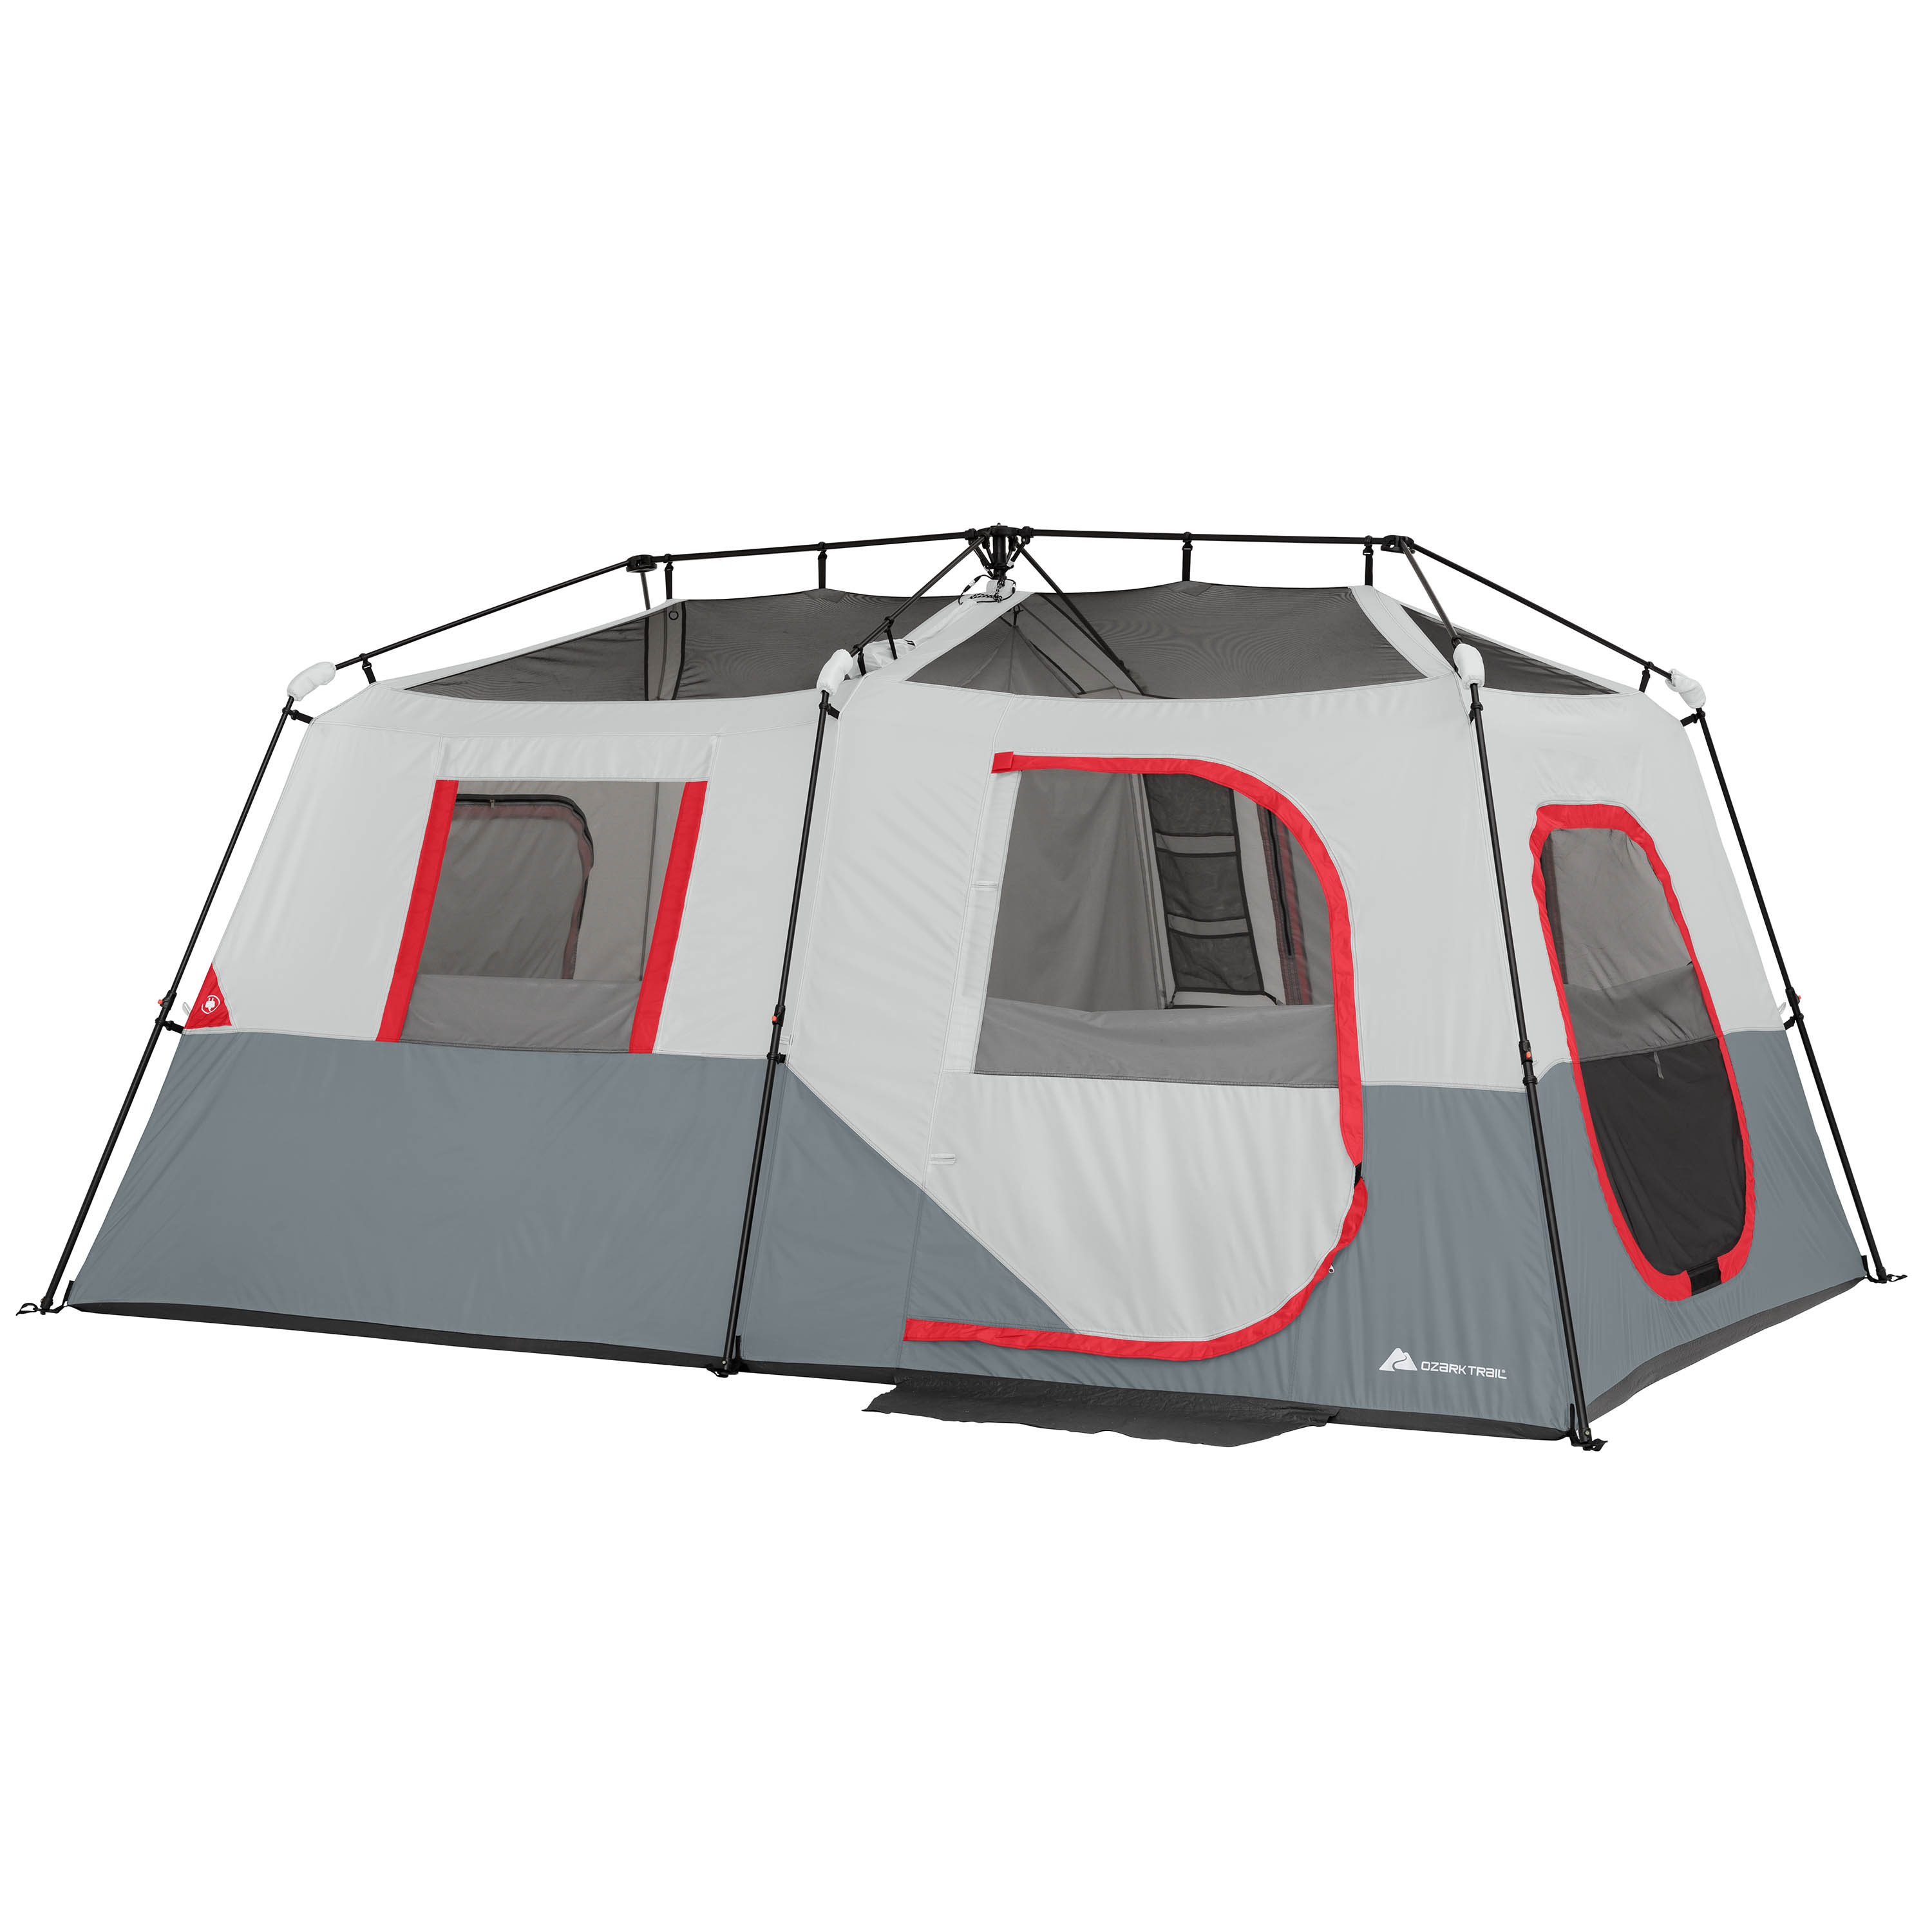 Ozark Trail 13' x 9' 8-Person Instant Cabin Tent with LED Lights, 36.9274 lbs - image 2 of 11